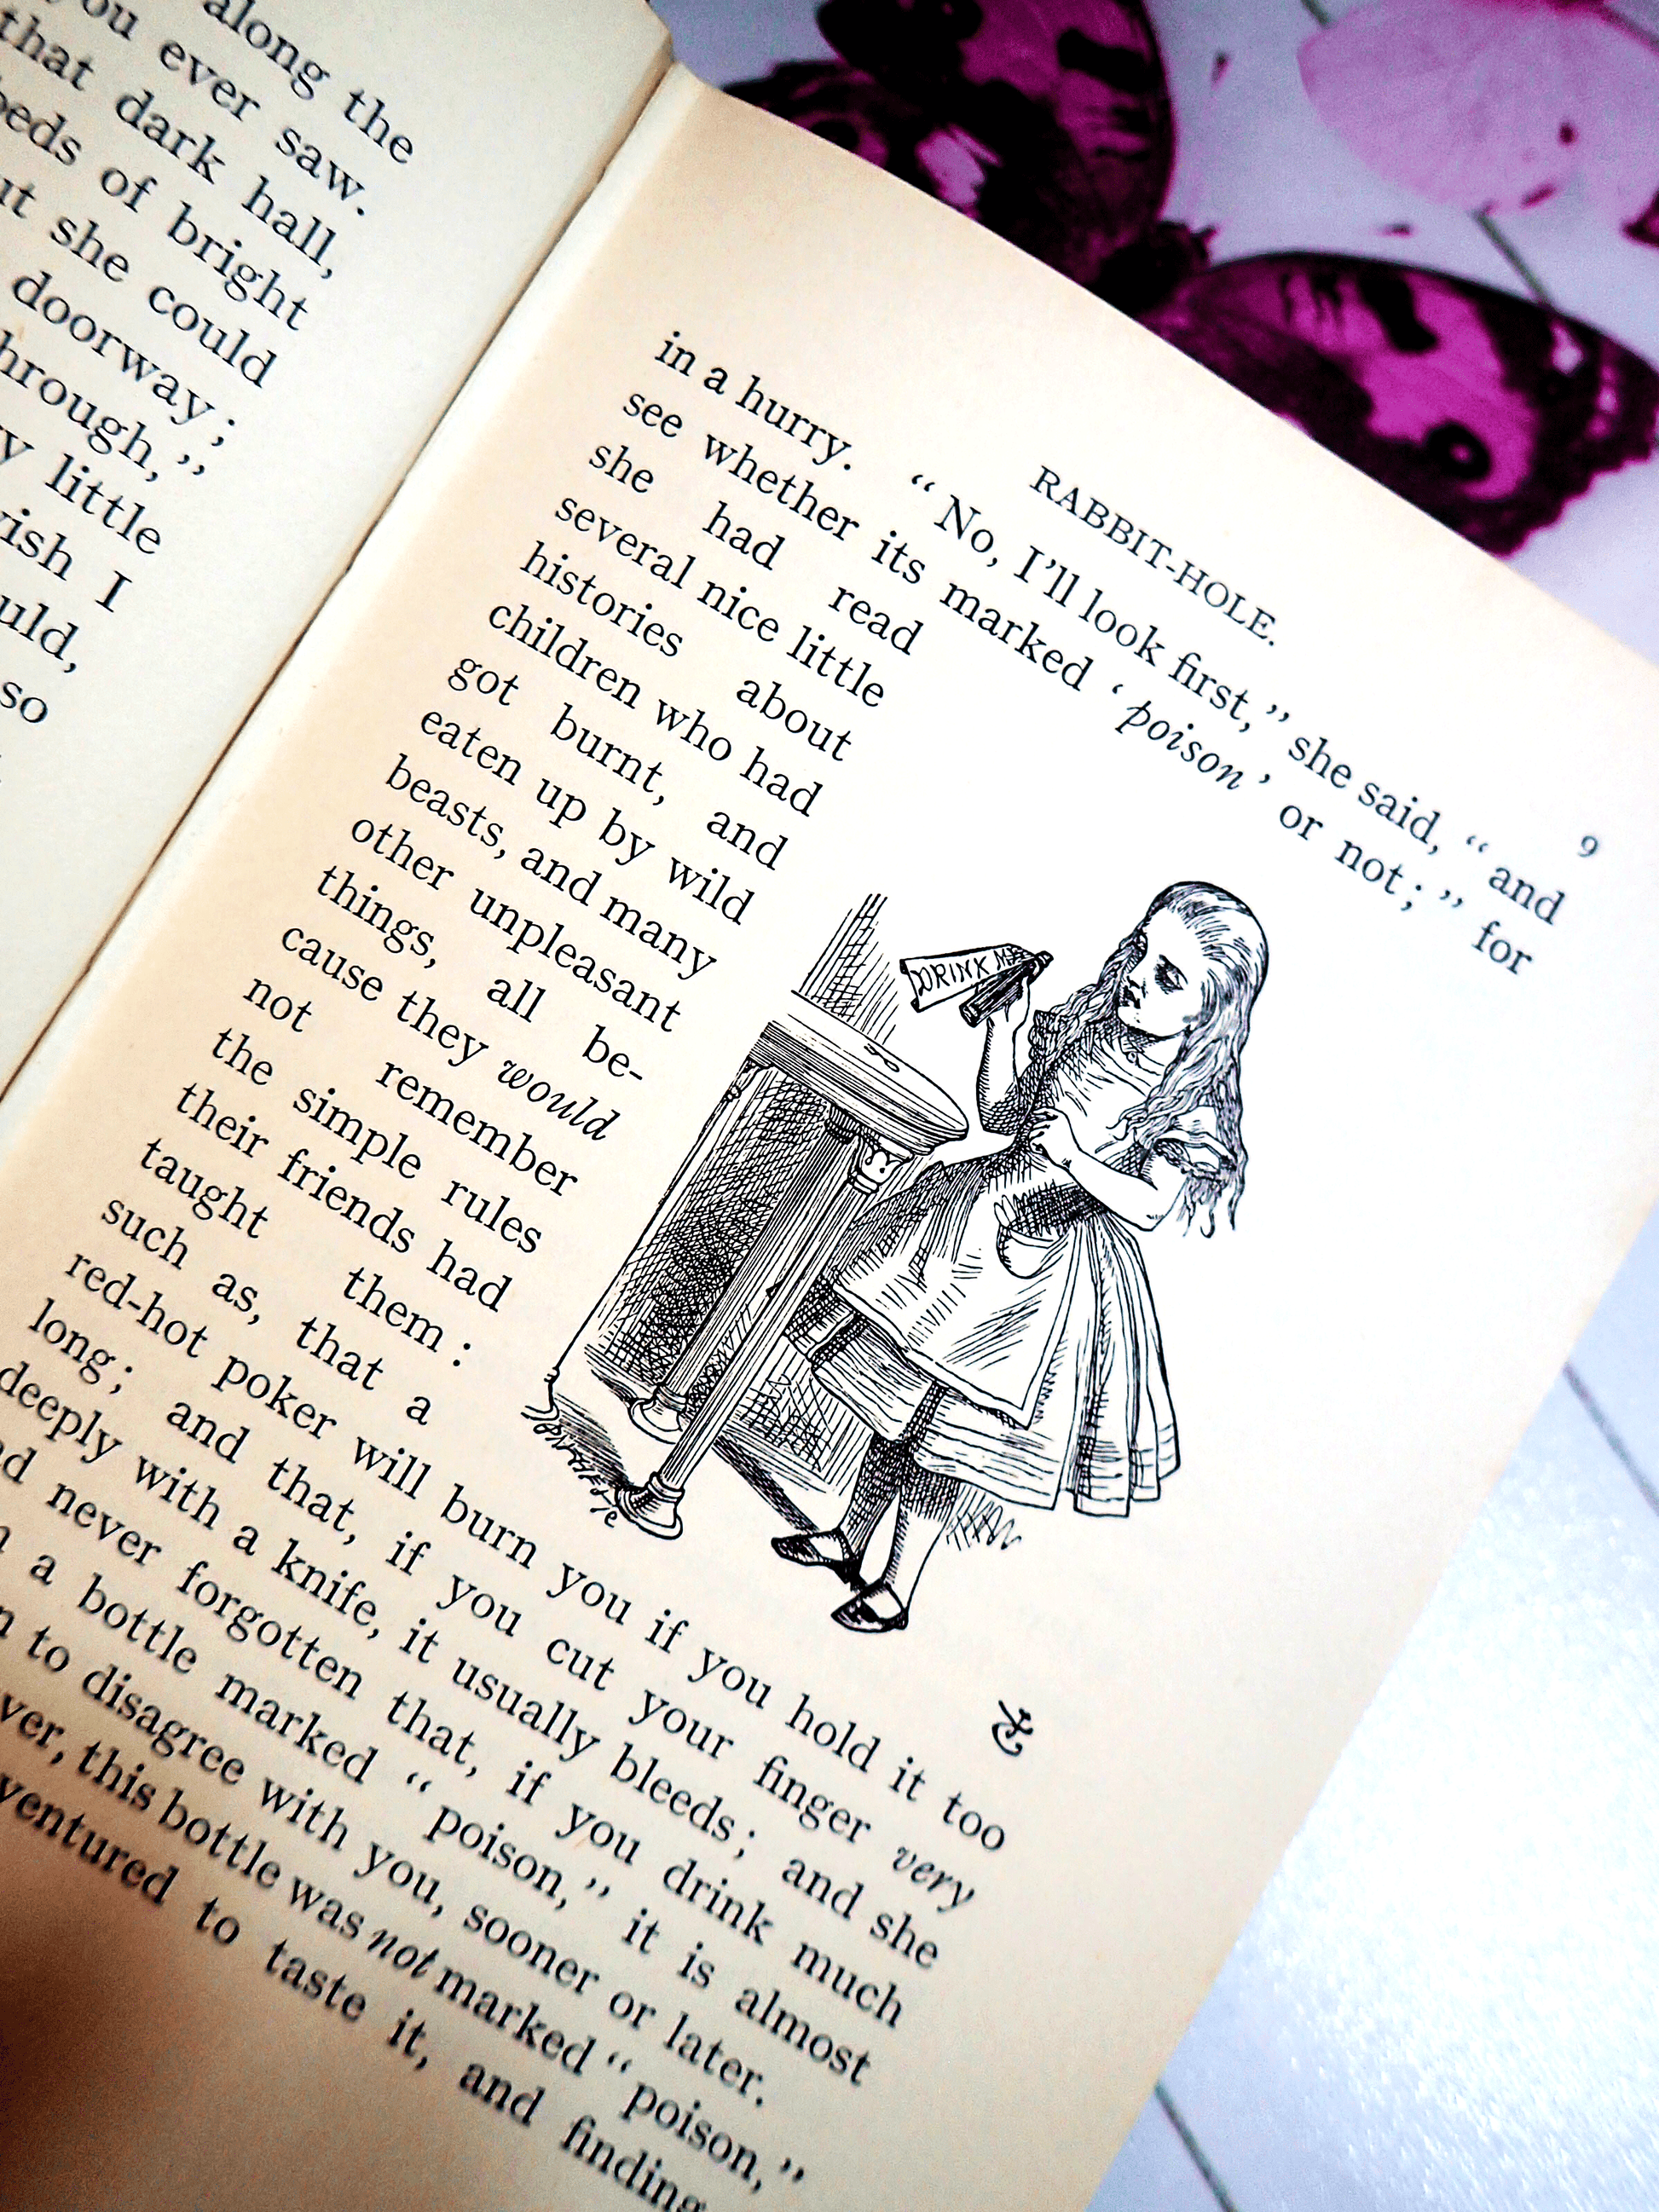 Alice peering at the Drink Me bottle, from 'Alice's Adventures in